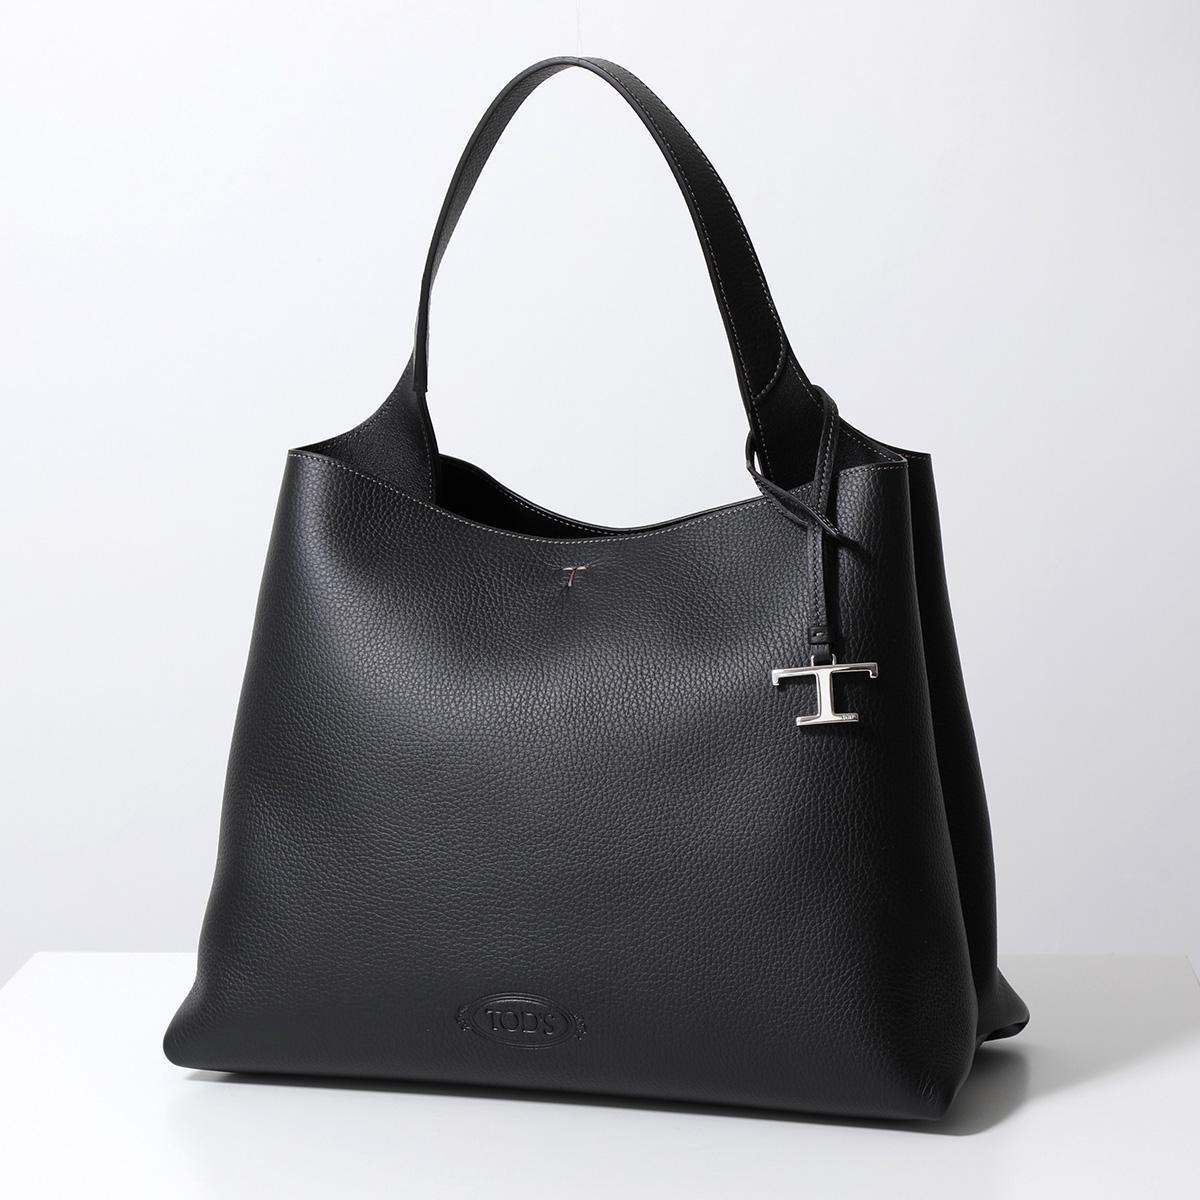 TODS トッズ トートバッグ T TIMELESS Tタイムレス XBWAPAA9300QRI レ...